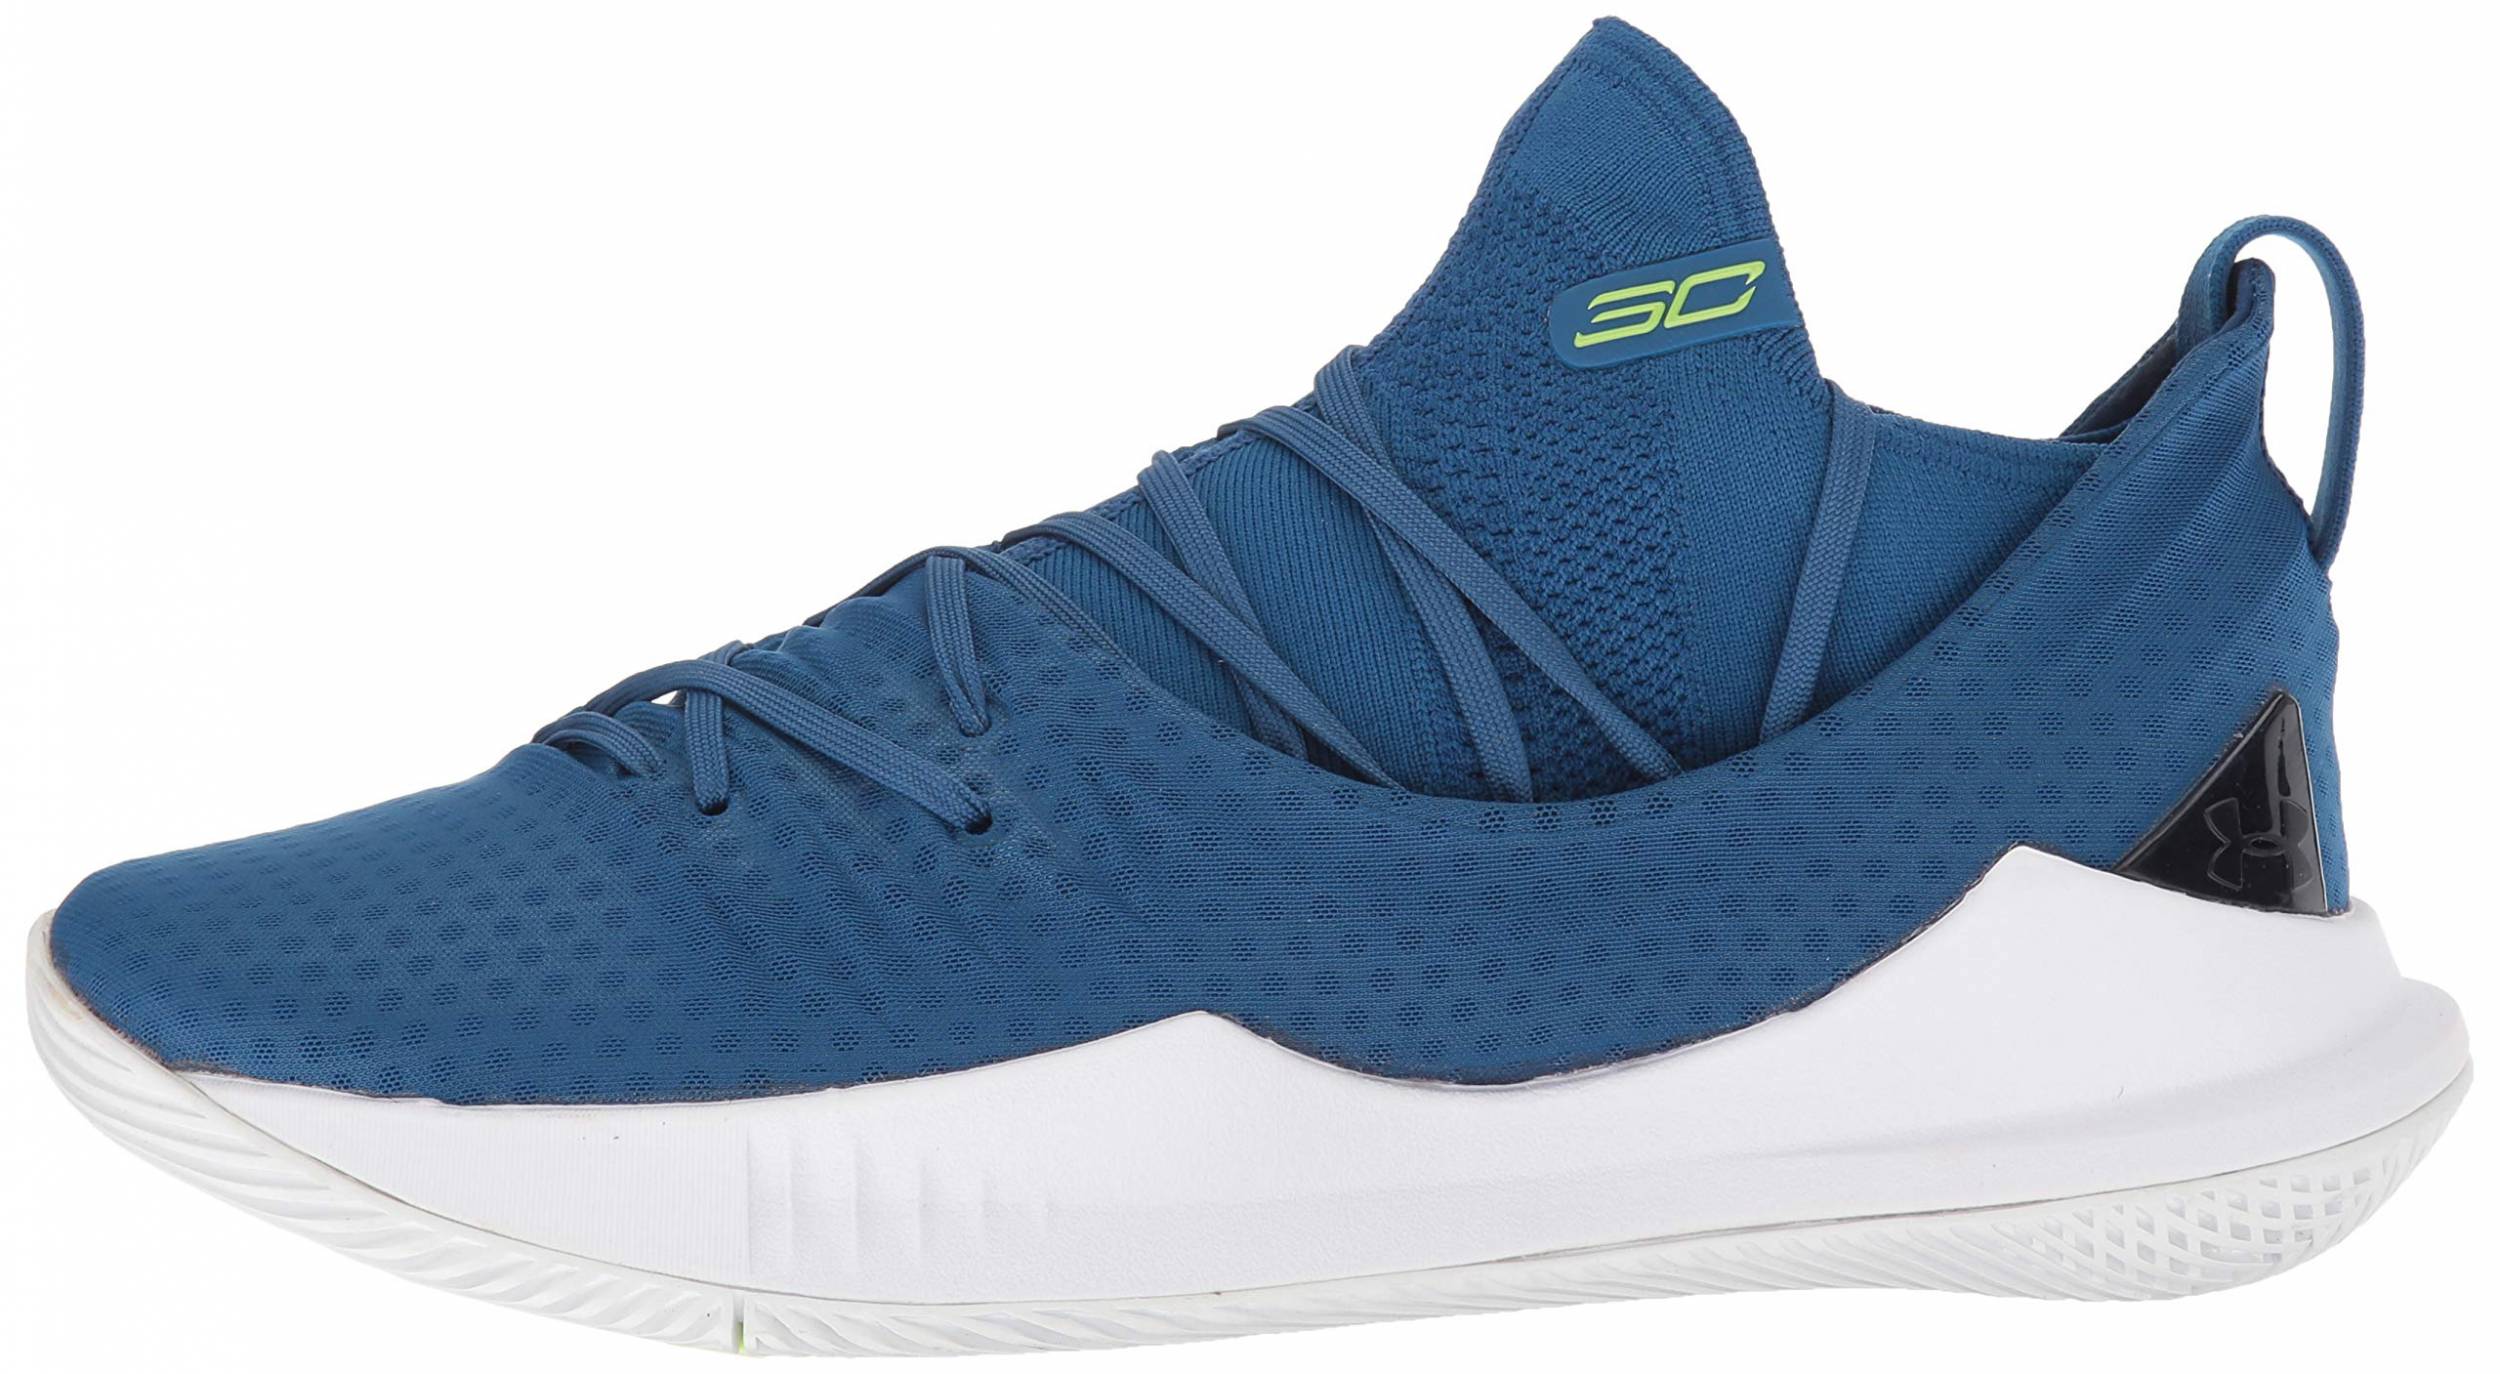 Review of Under Armour Curry 5 